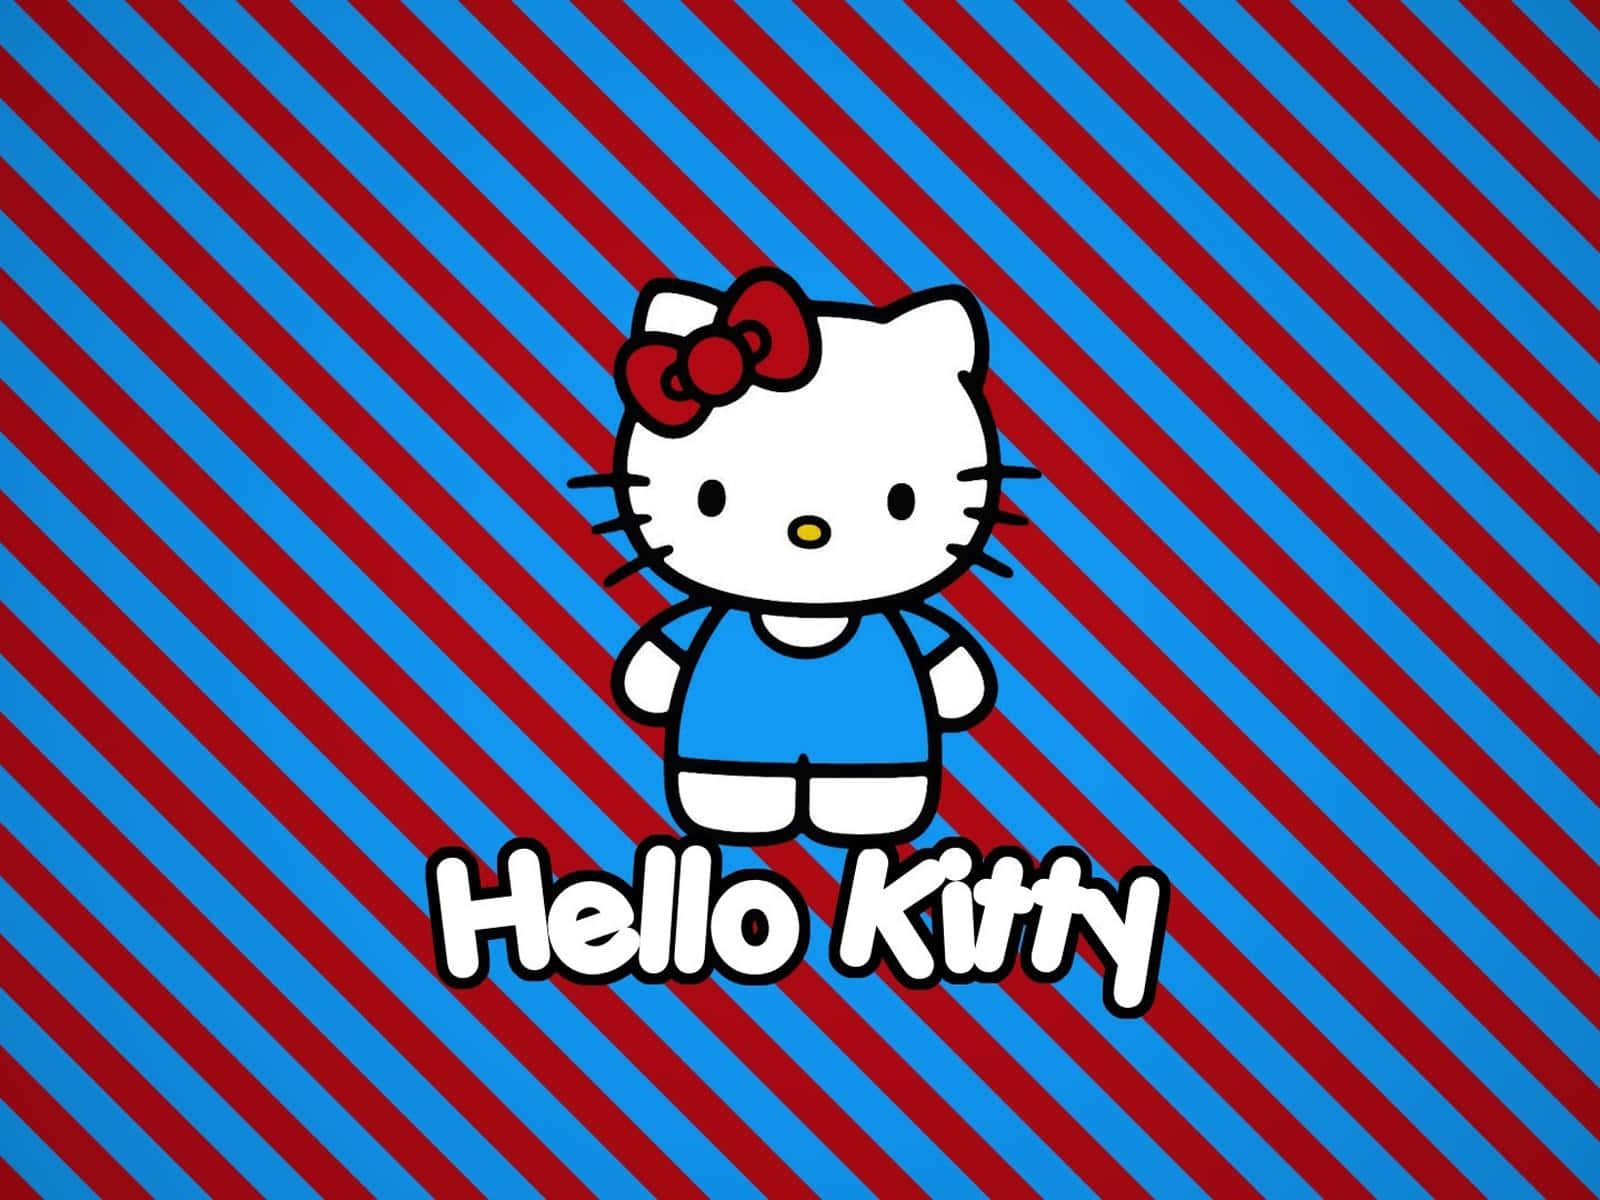 Hello Kitty Red Blue Striped Background Wallpaper